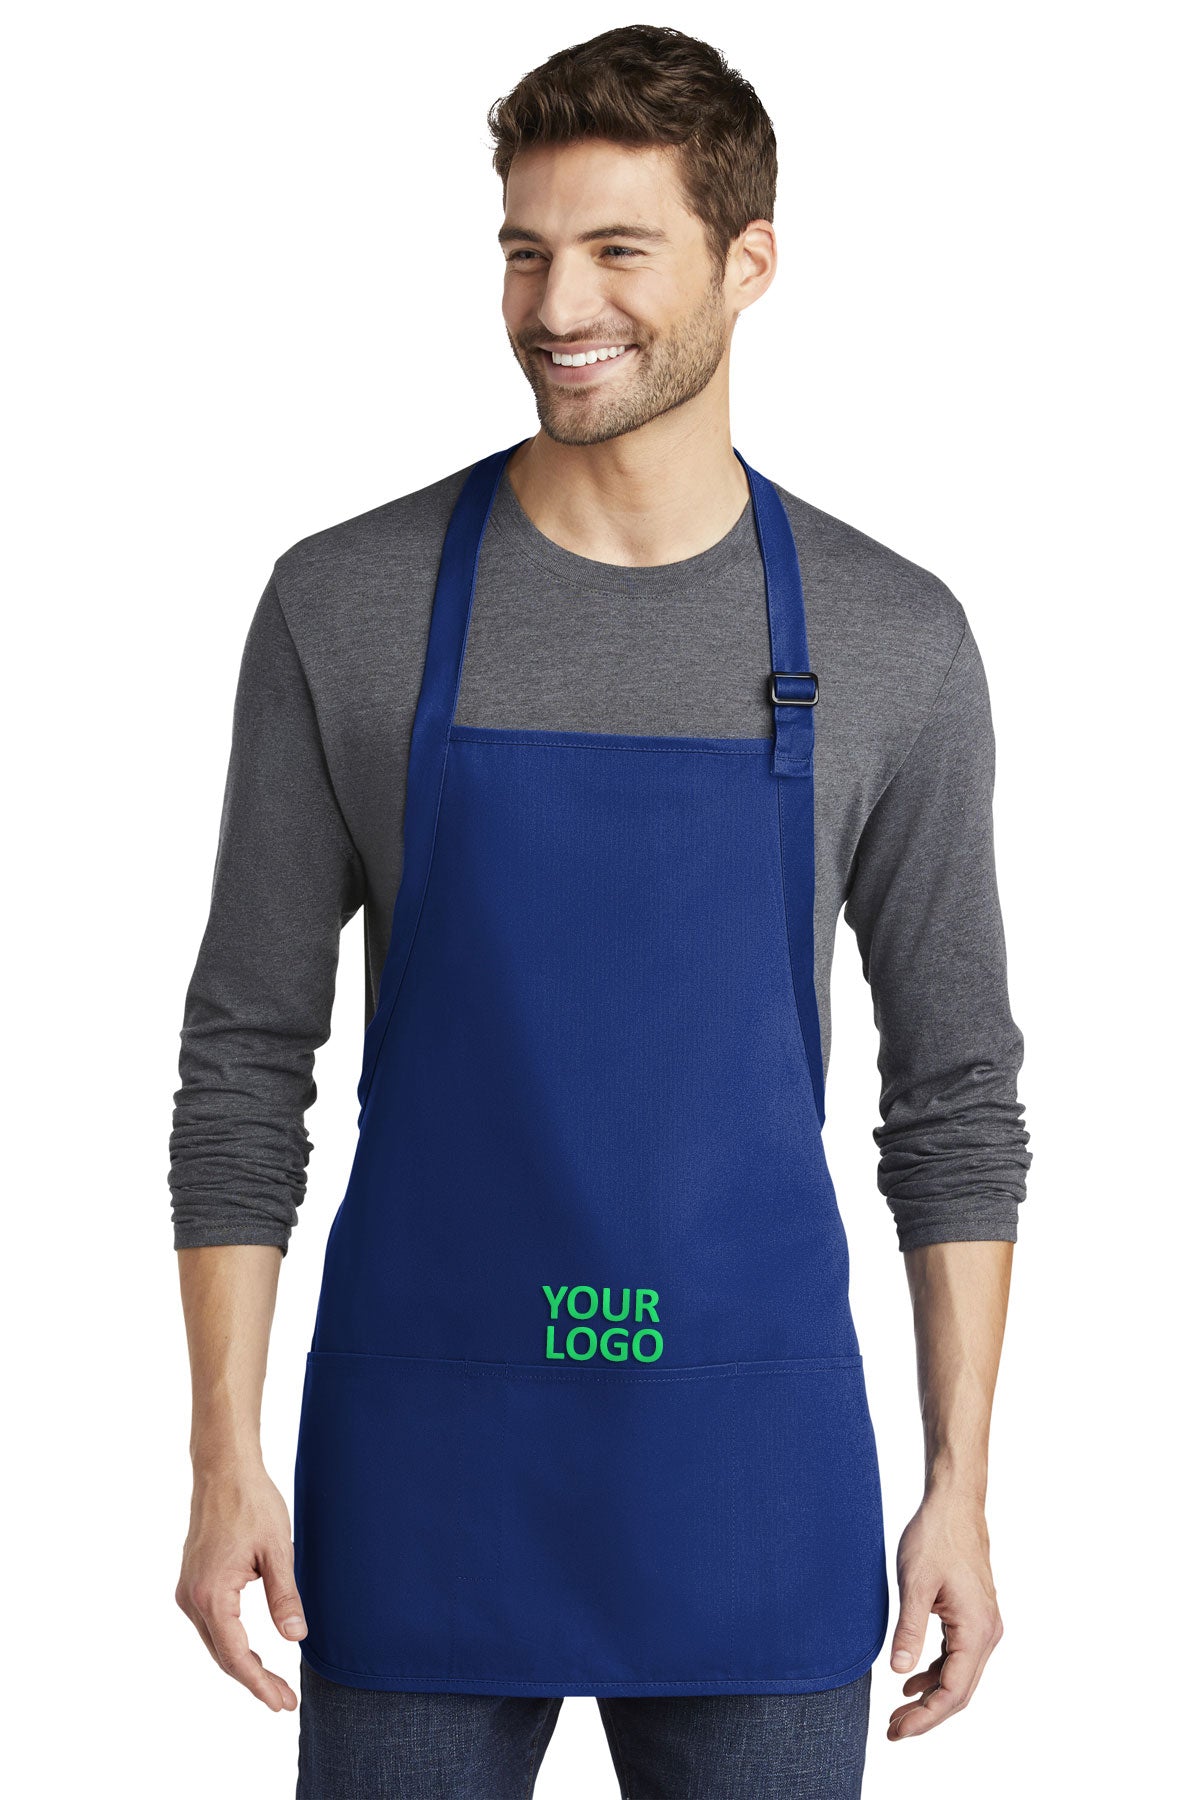 Port Authority Medium-Length Apron with Pouch Pockets A510 Royal